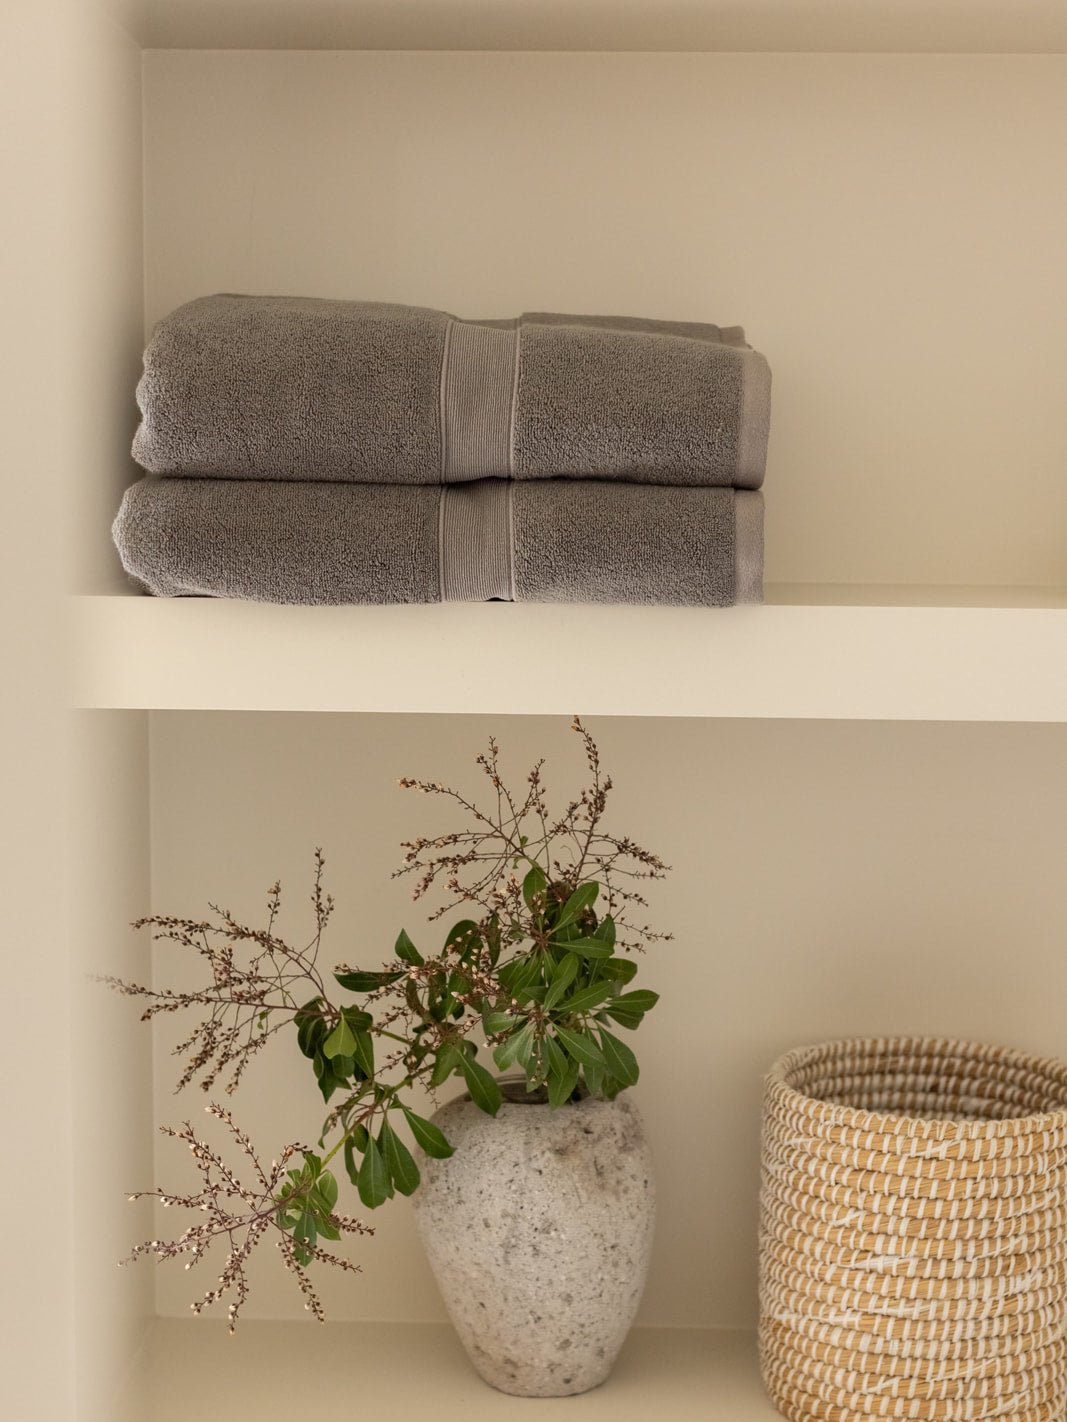 Luxe bath towels on shelf above plant 